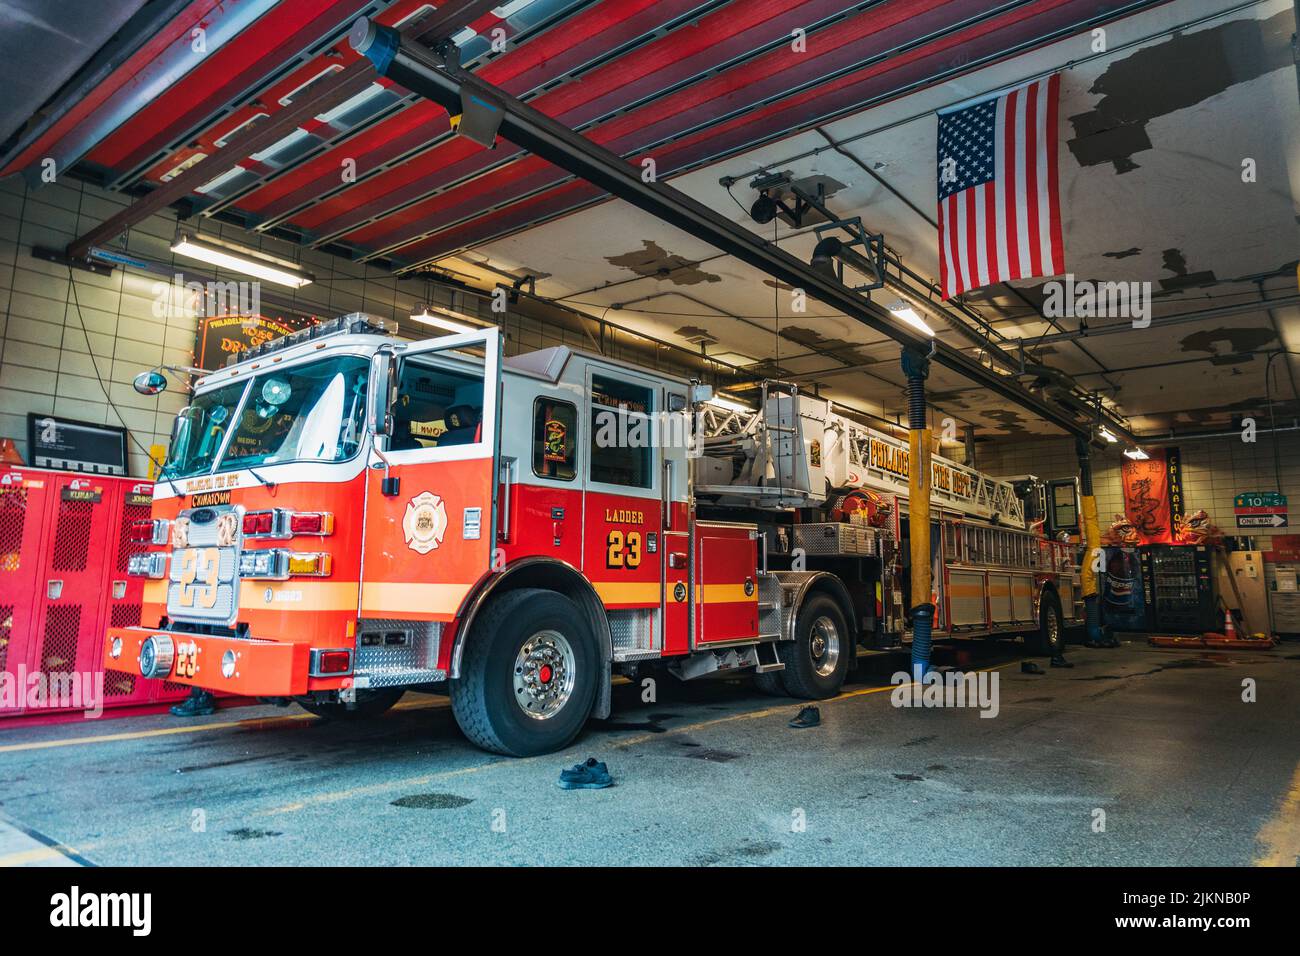 Ladder 23 fire truck inside the Philadelphia Fire Department Chinatown station Stock Photo